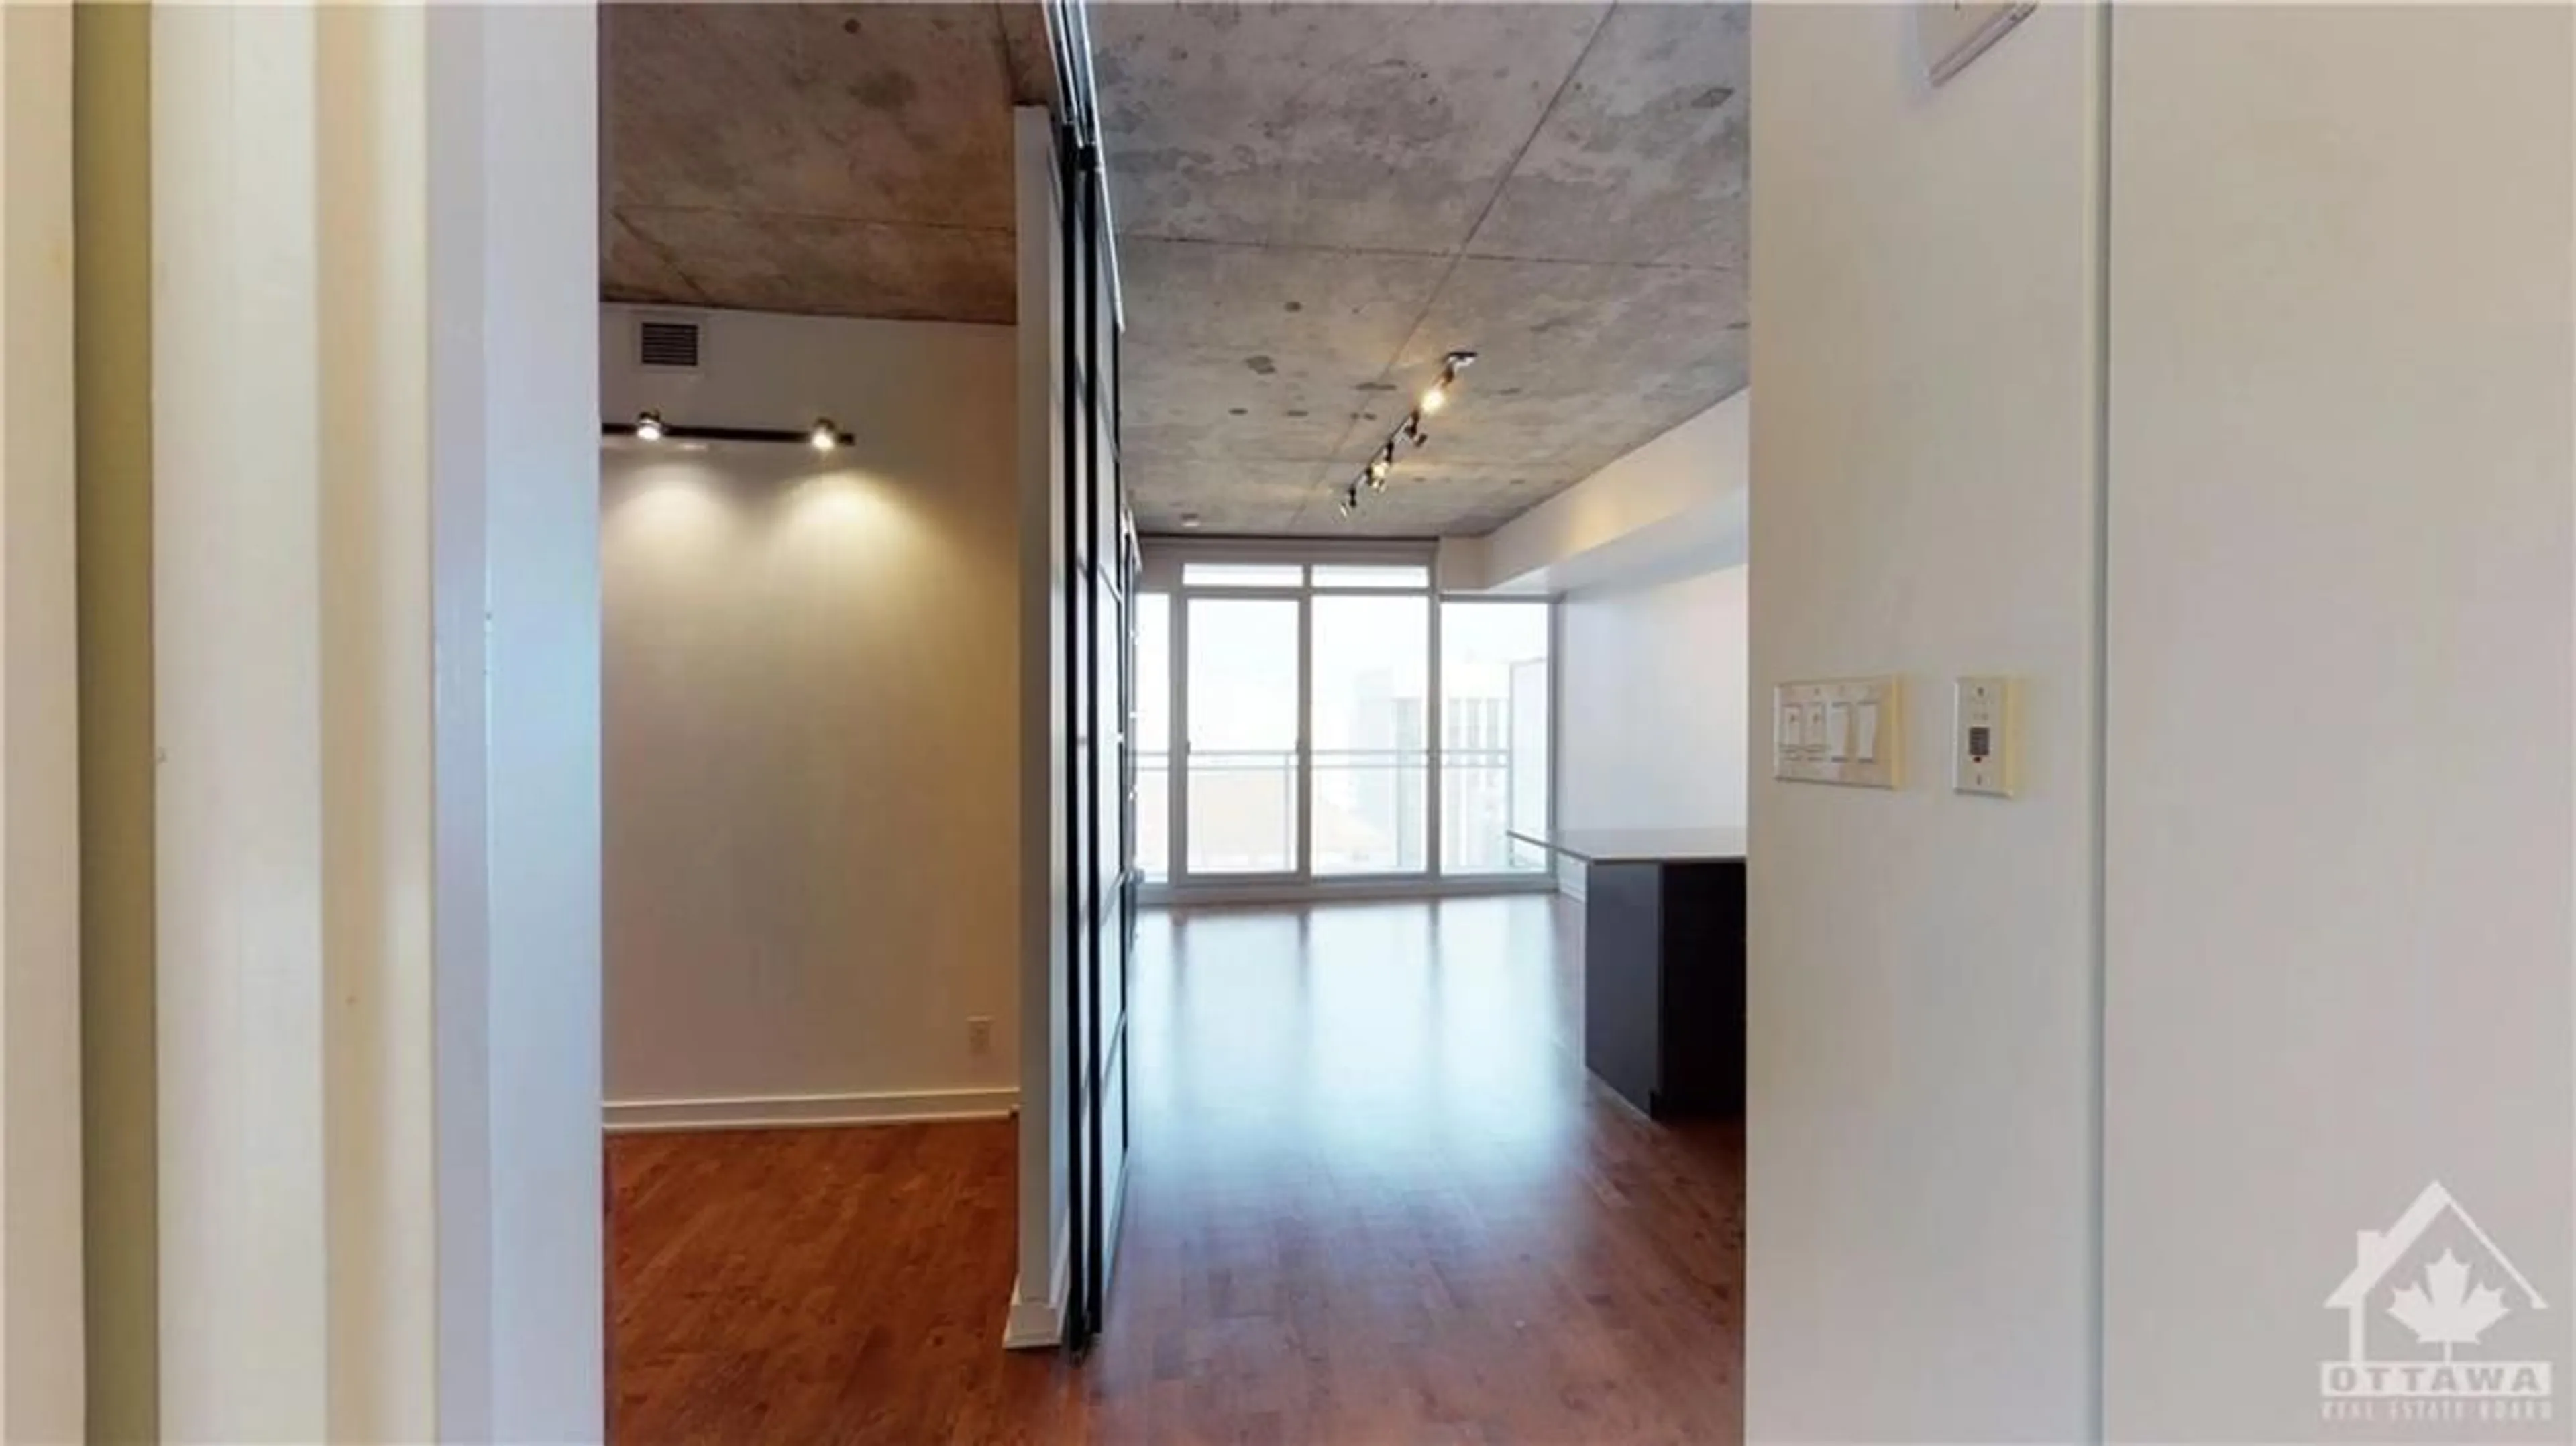 Other indoor space for 324 LAURIER Ave #1705, Ottawa Ontario K1N 6P6